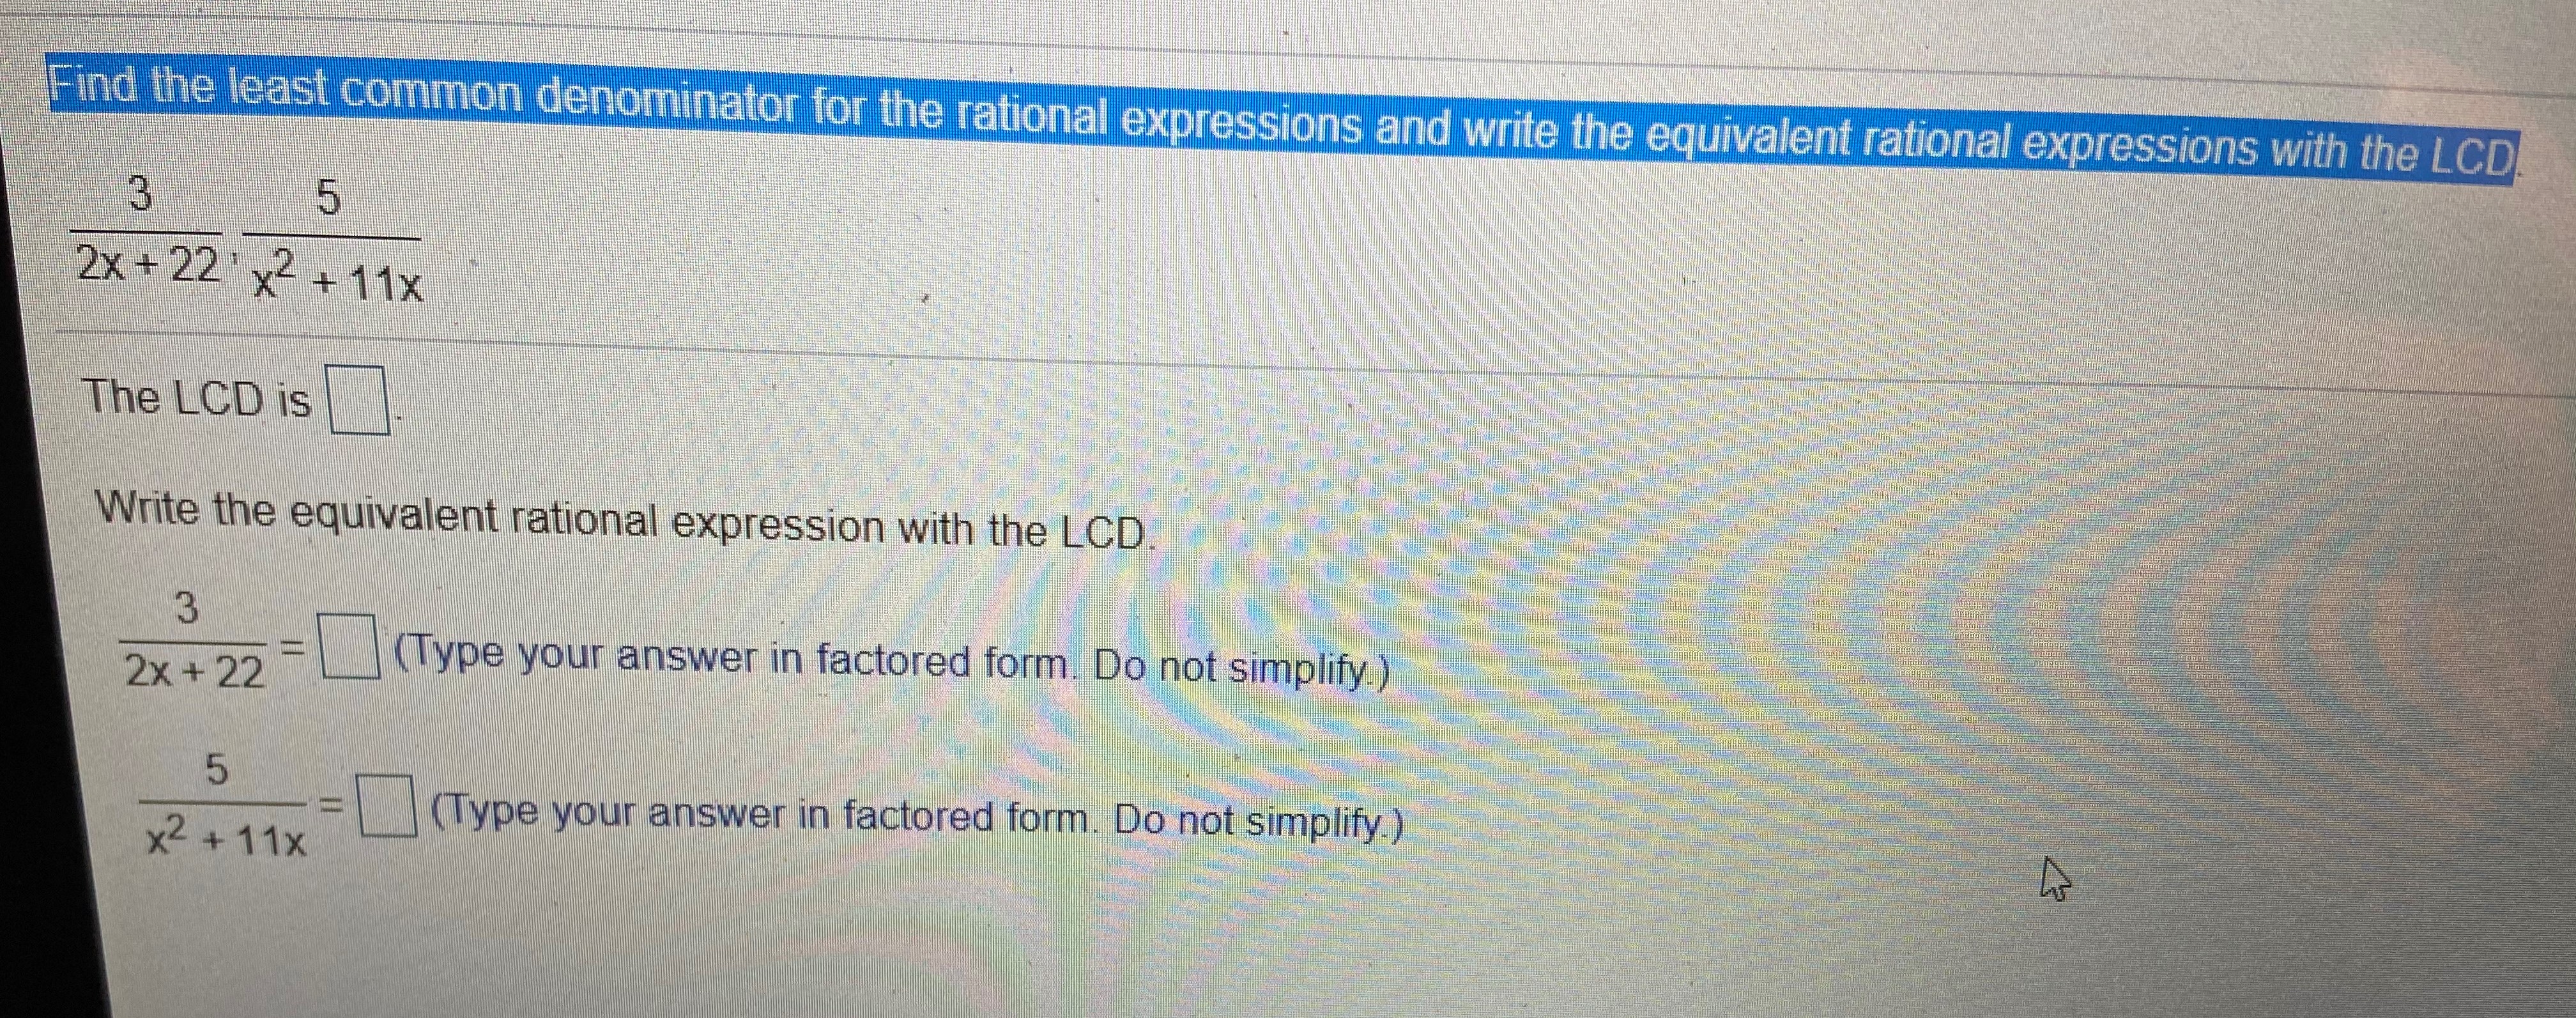 Find the least common denominator for the rational expressions and write the equivalent rational expressions with the LCD
3.
2x +22 x2 + 11x
The LCD is
Write the equivalent rational expression with the LCD.
(Type your answer in factored form. Do not simplify)
2x +22
(Type your answer in factored form. Do not simplify )
x2 +11x
